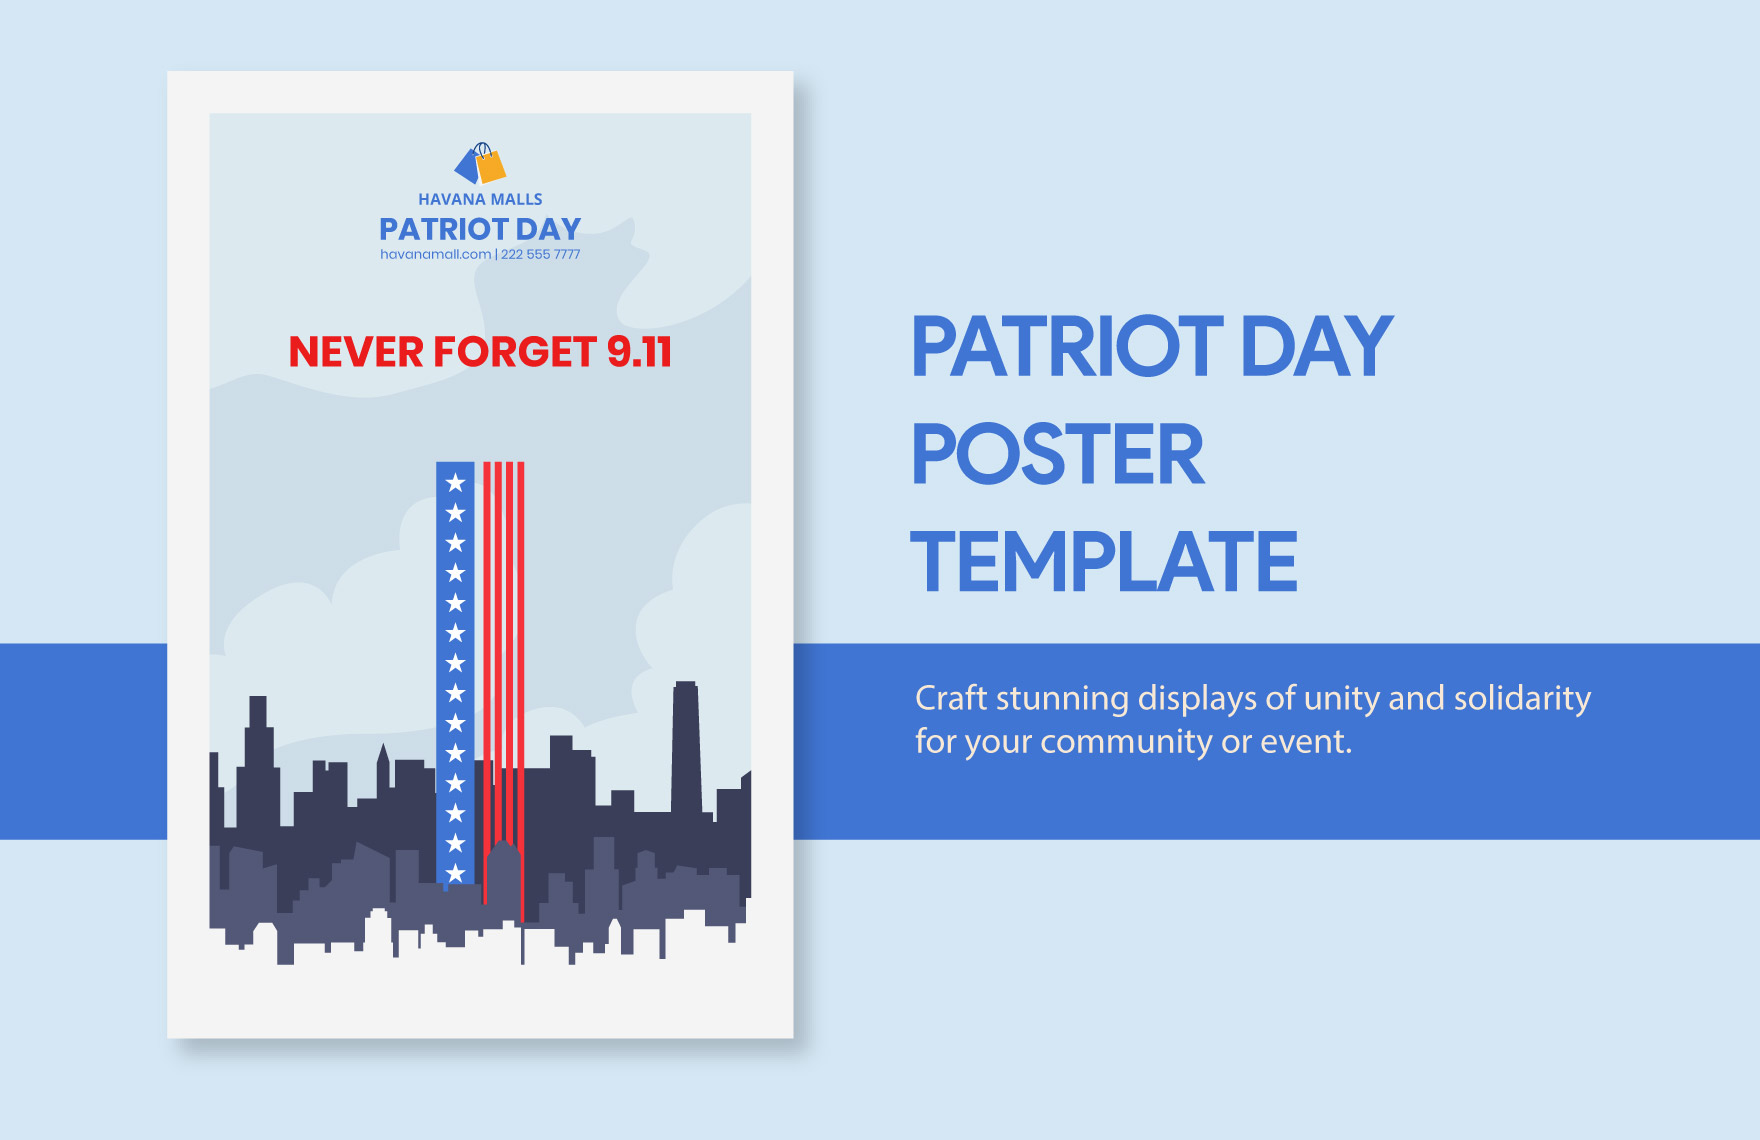 Free Patriot Day Poster Template in Illustrator, PSD, PNG